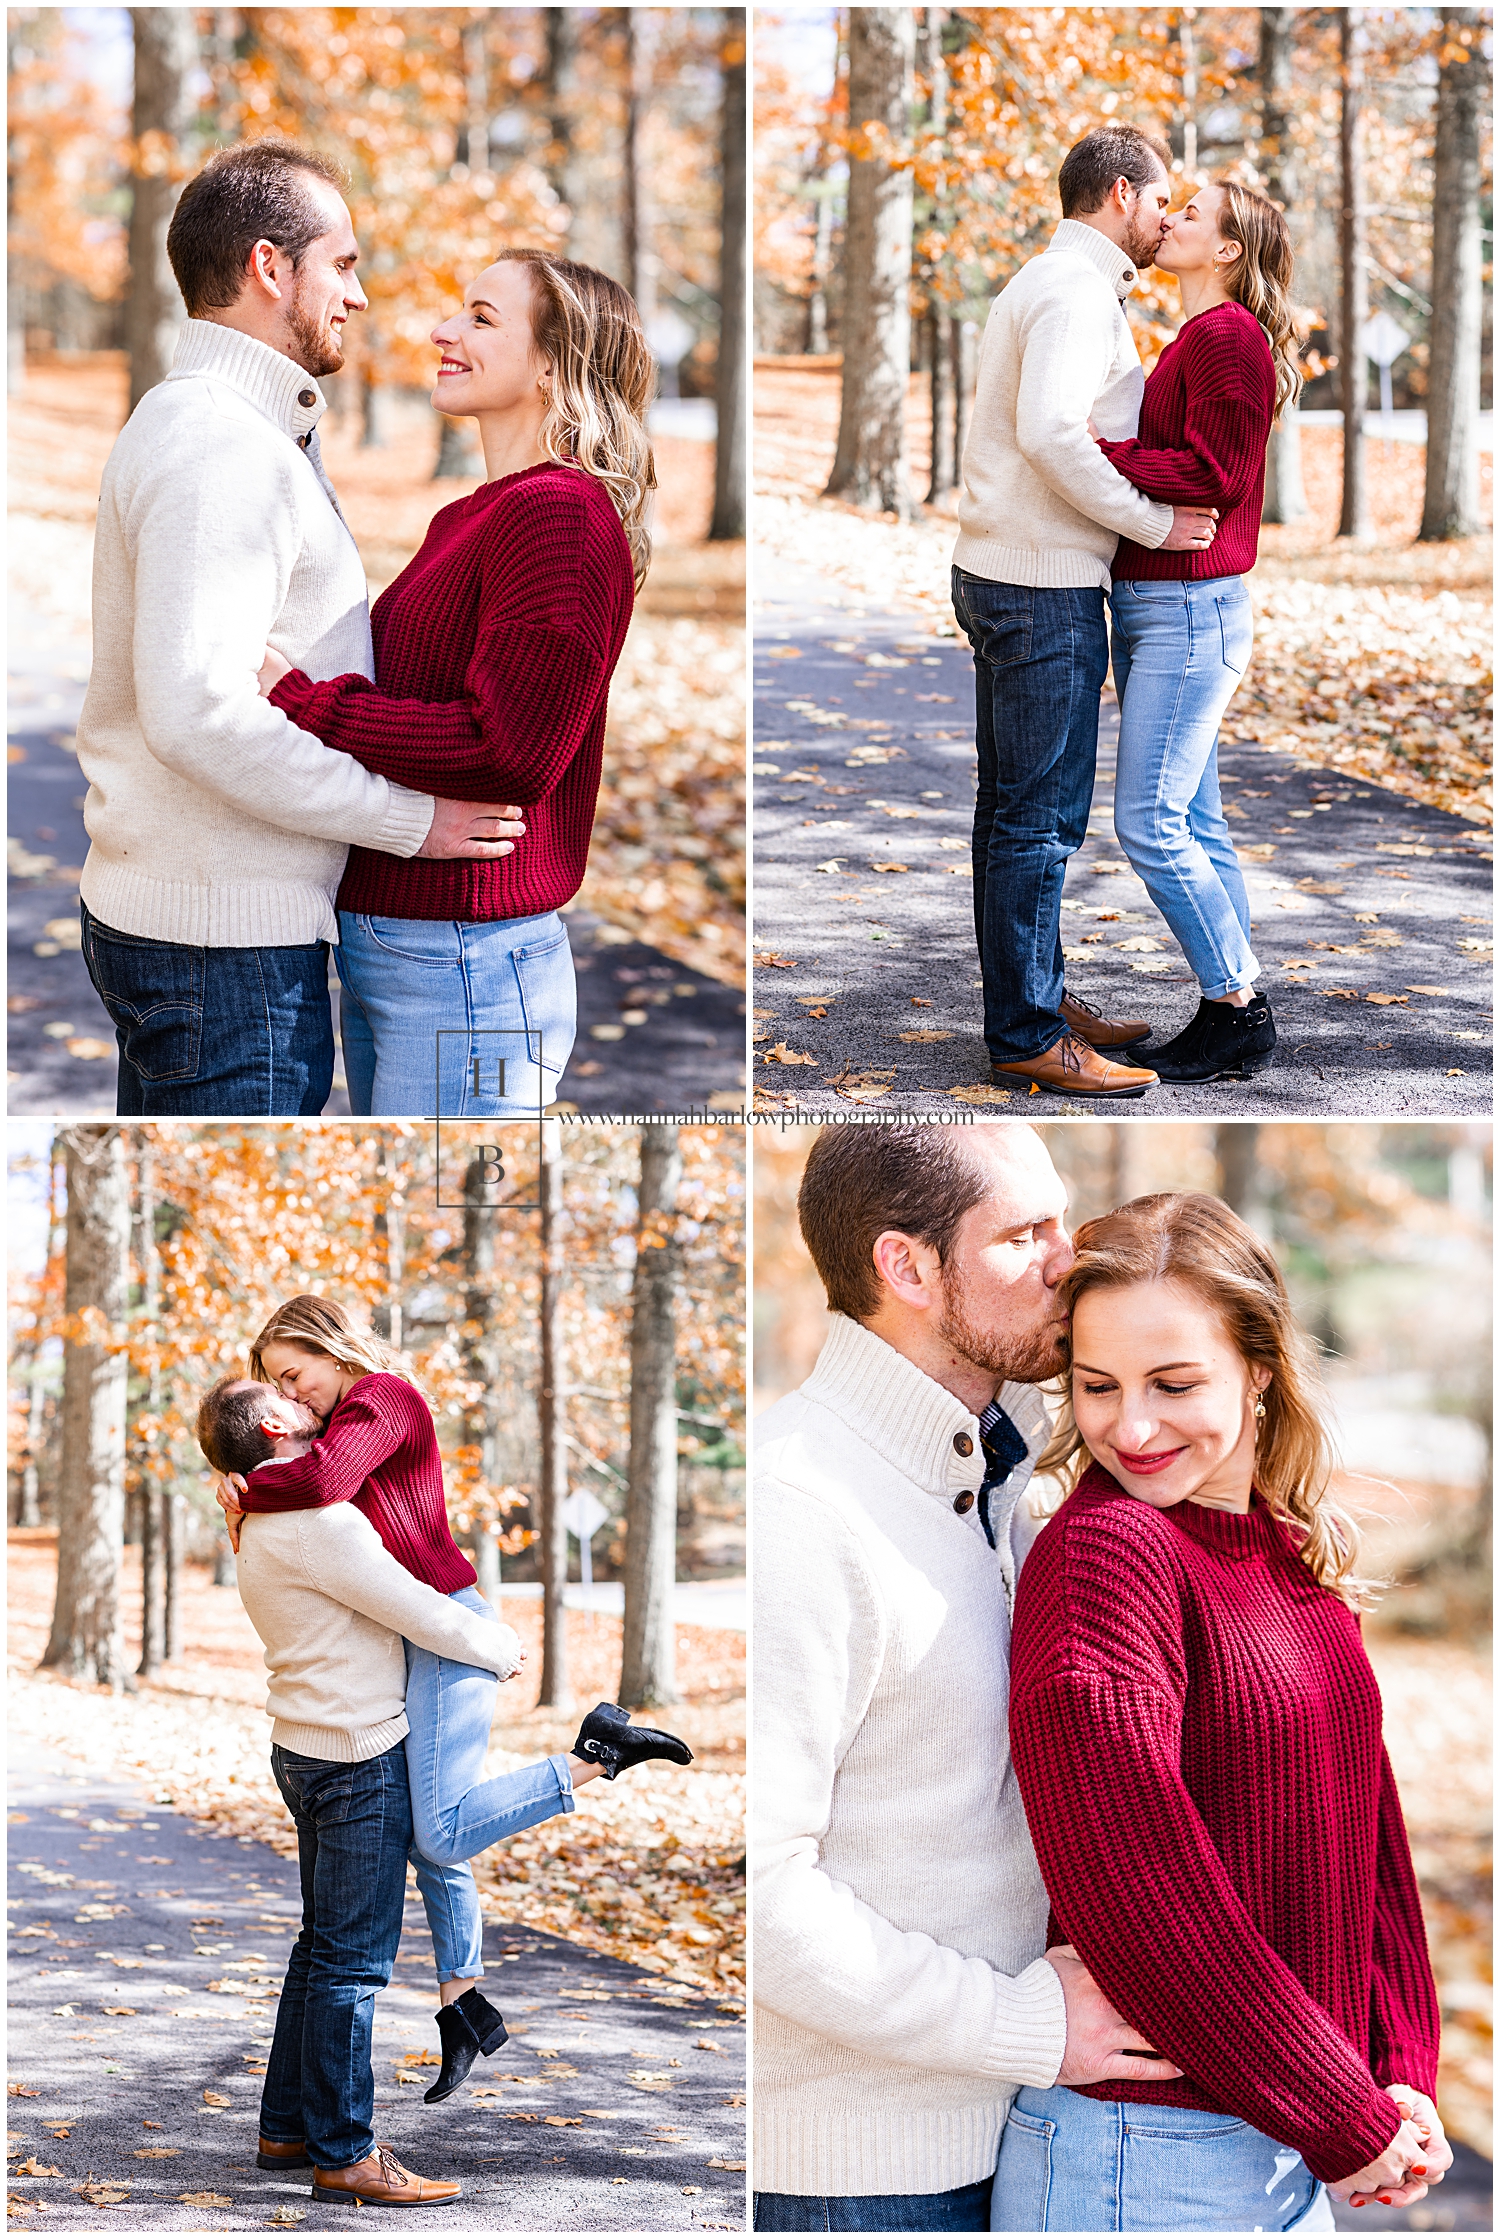 Couple stands on asphalt path in fall foliage forest for engagement photos.